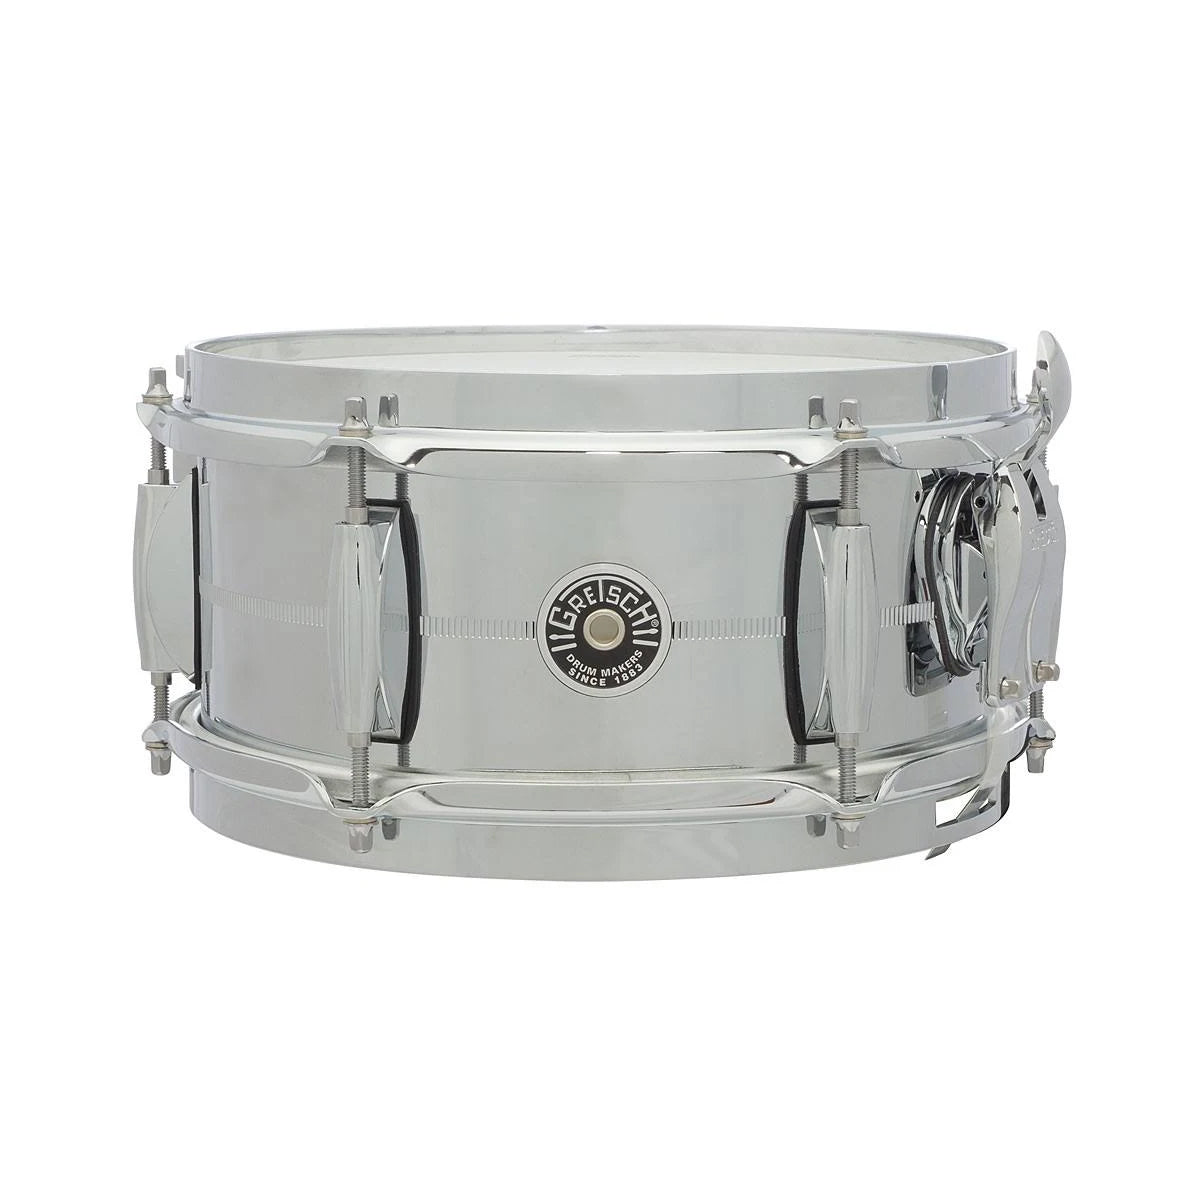 Gretsch USA Brooklyn Chrome Over Steel 10"x5" Snare Drum